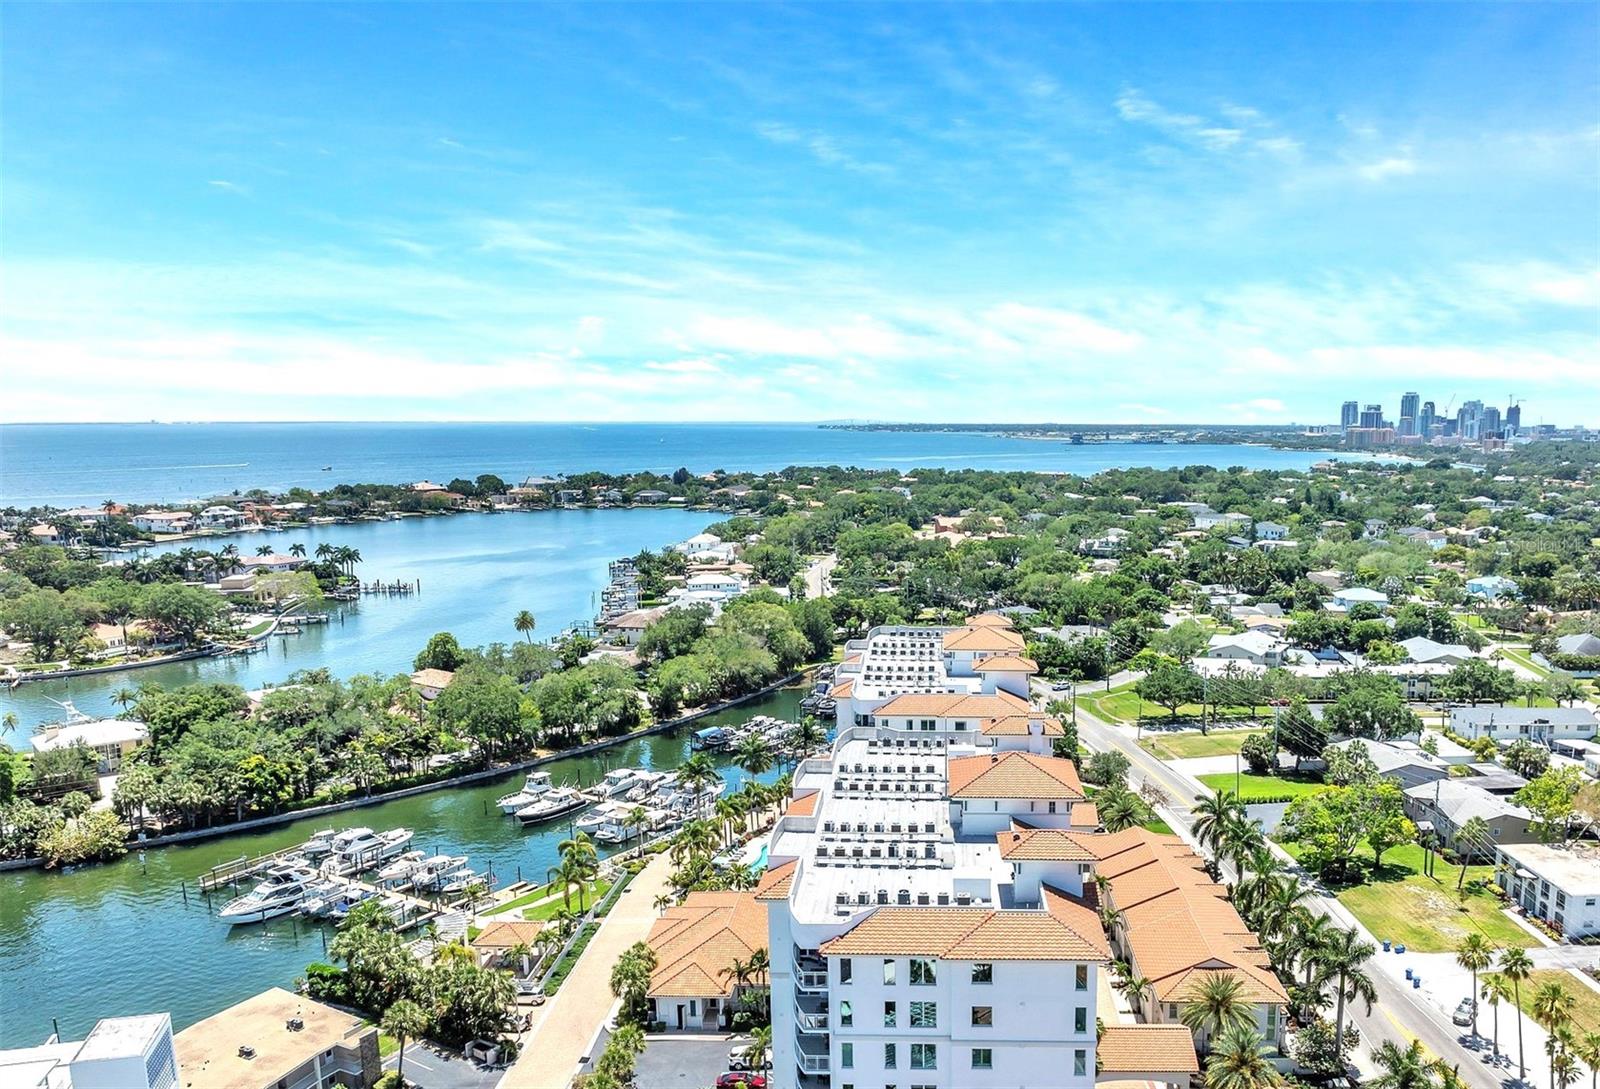 Location on the water, and still close to downtown St Pete, see top right side!